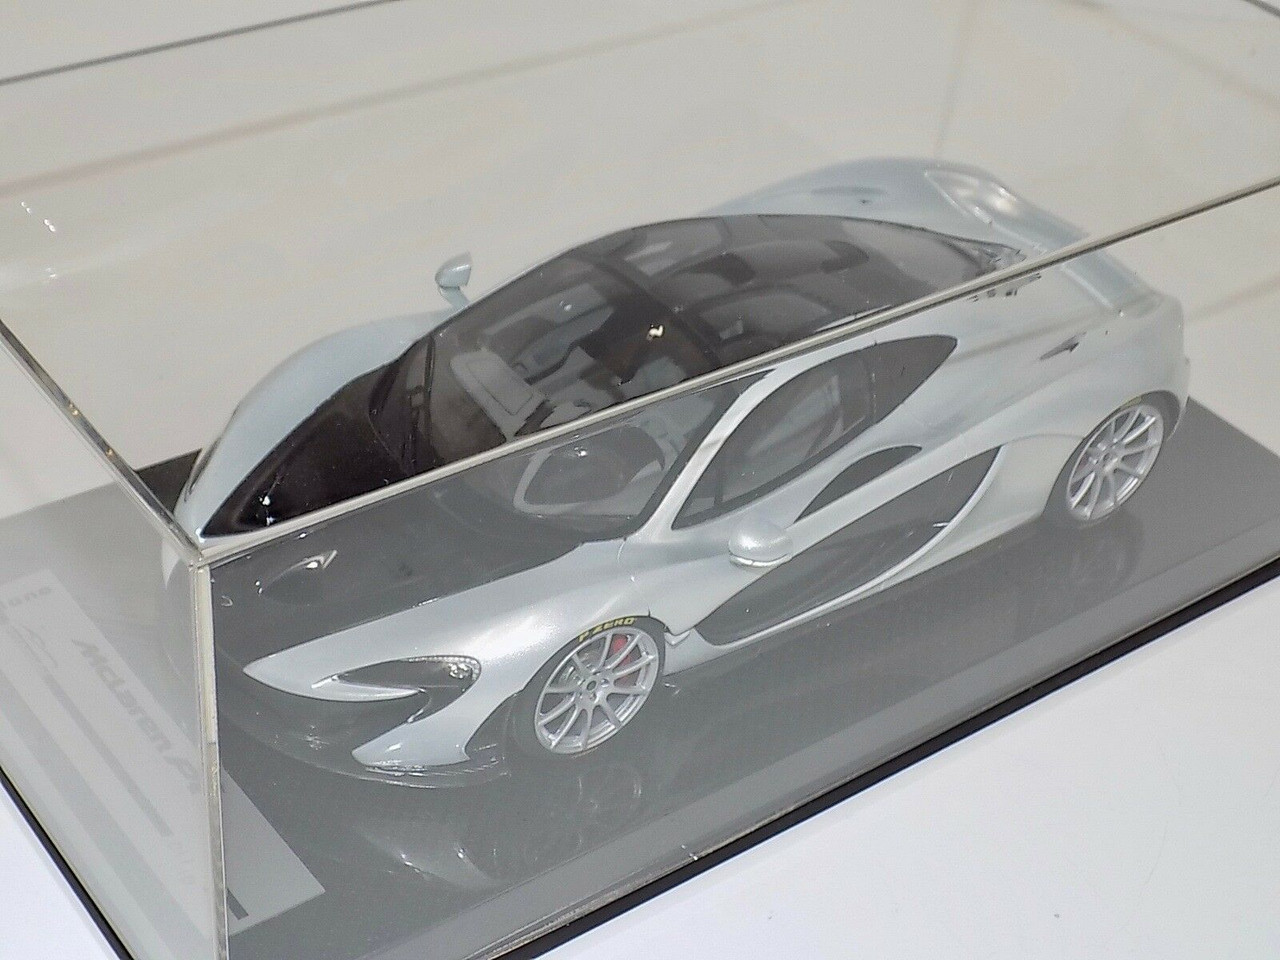 1/18 Tecnomodel McLaren P1 (Ice Silver with Silver wheels & Black Hood) with Carbon Base Resin Car Model Limited 01/10